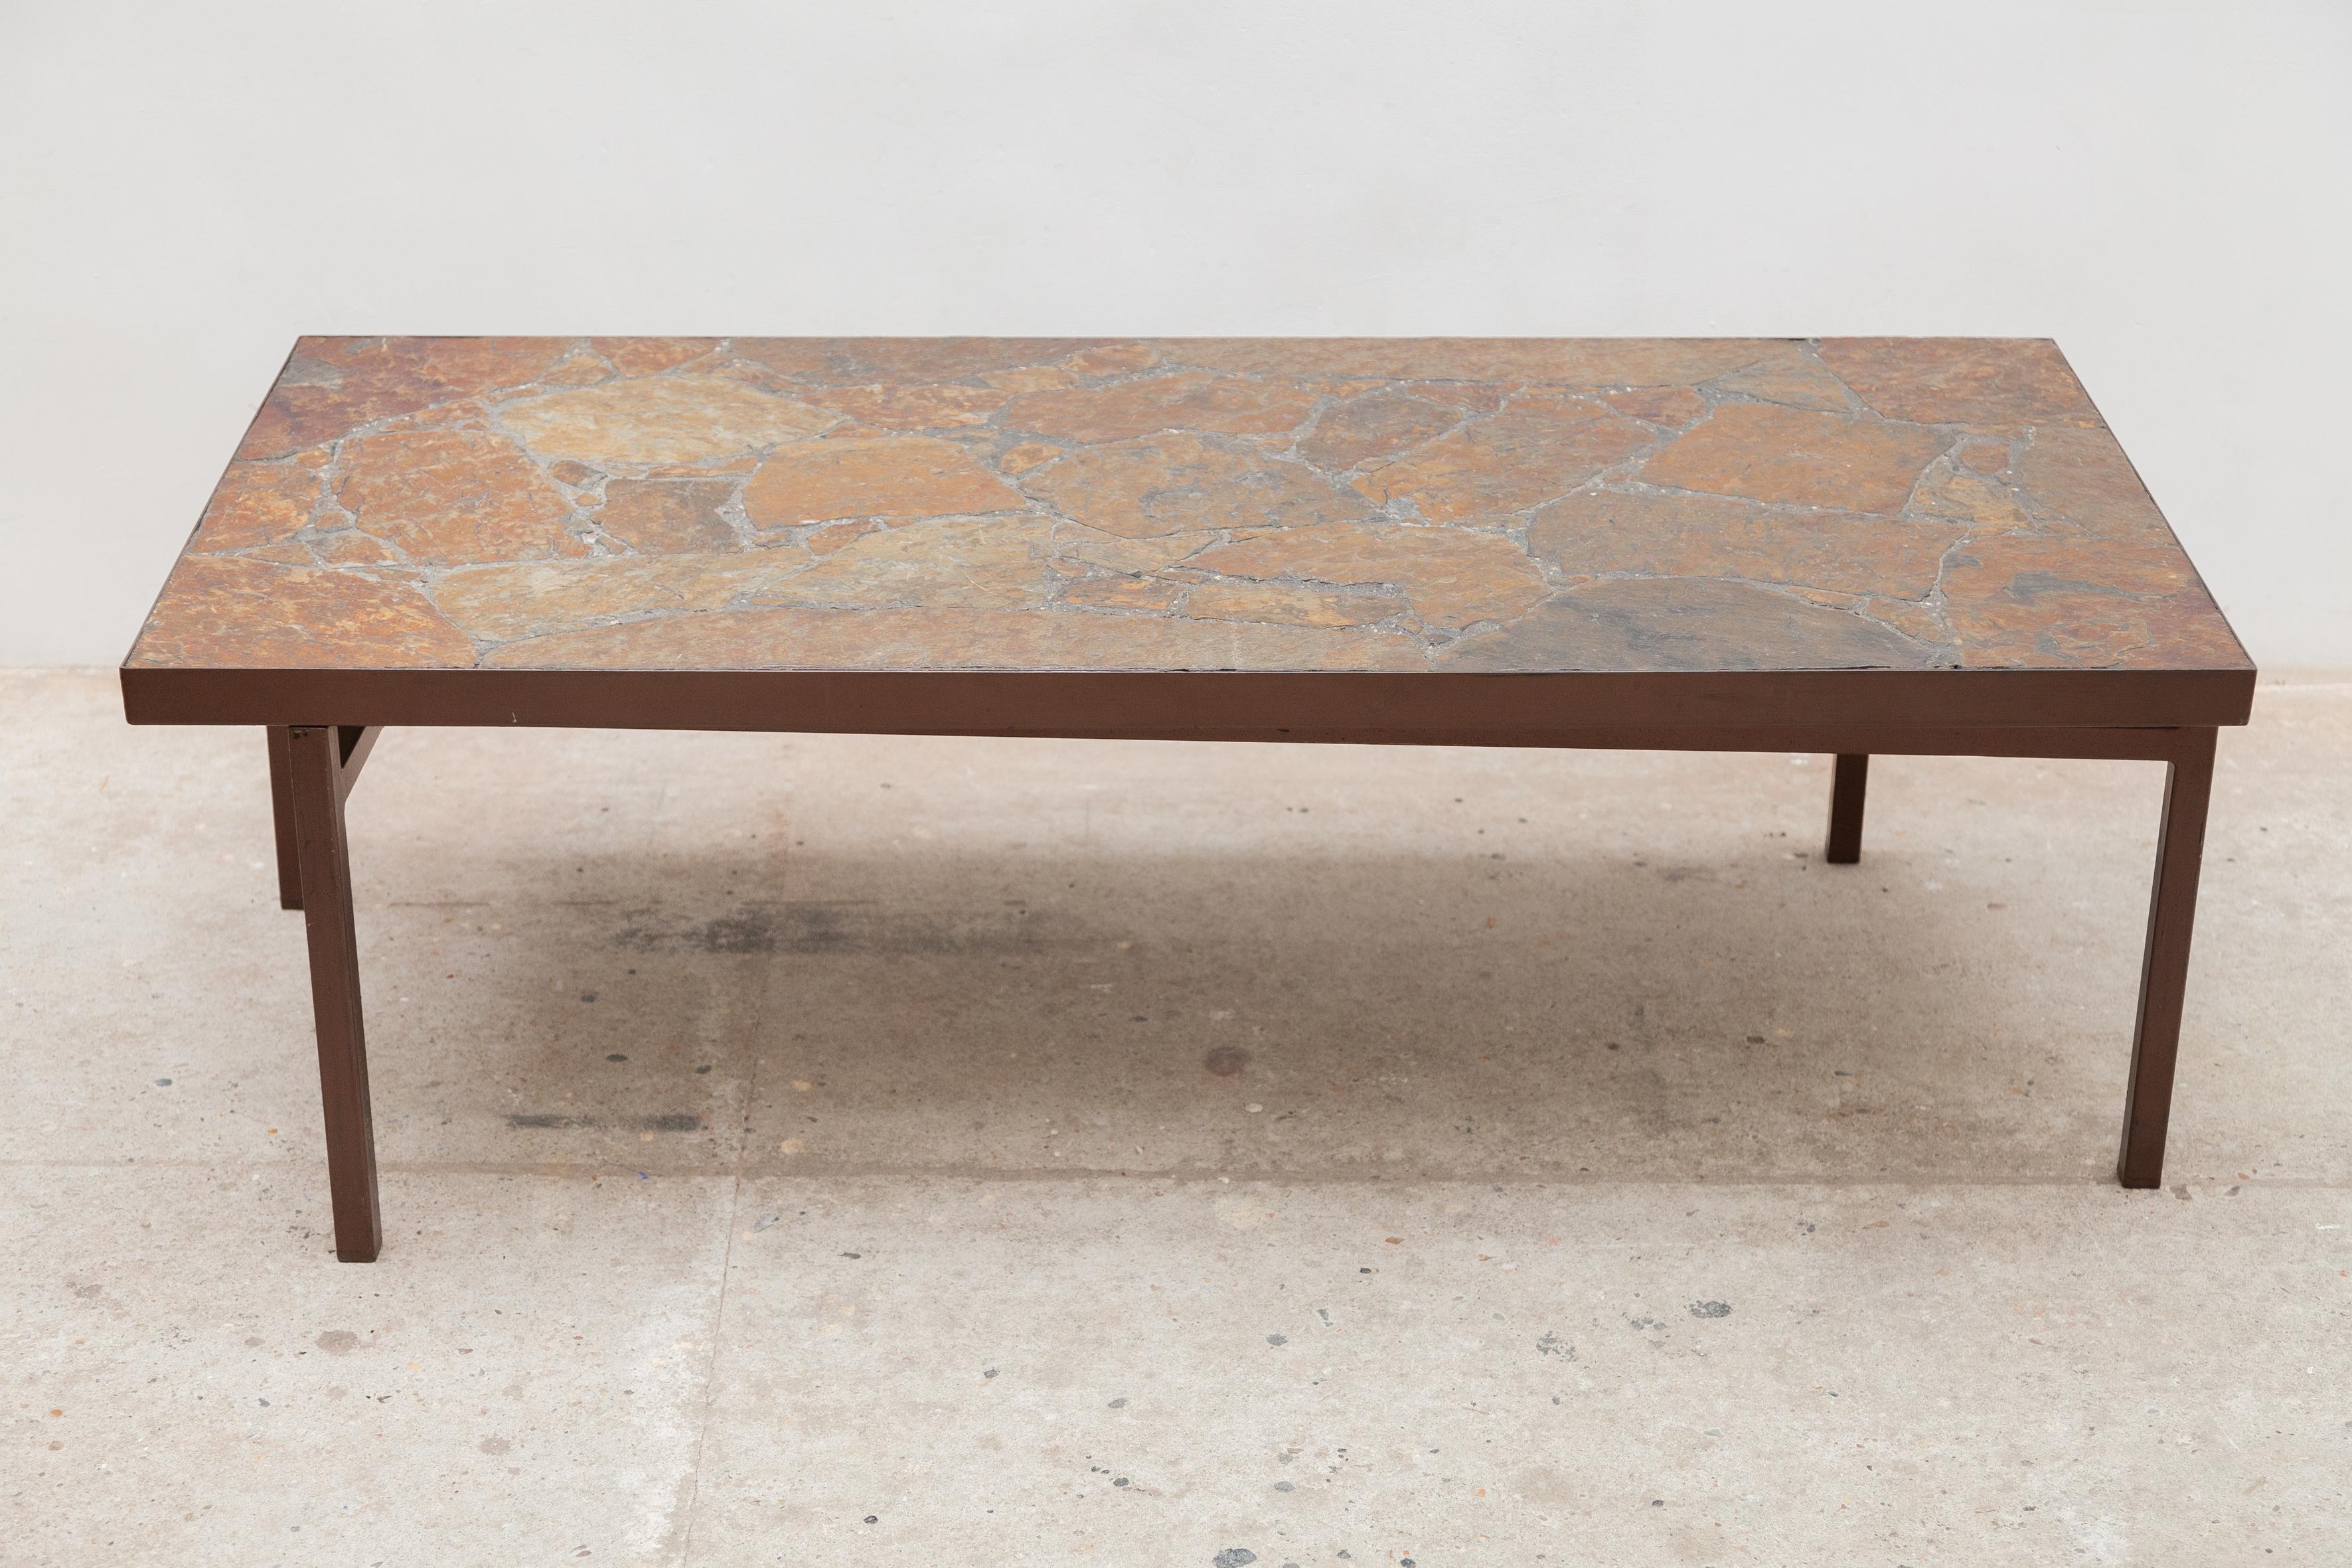 Hand-Crafted Slate Stone Brutalist Coffee Table, Dutch Design